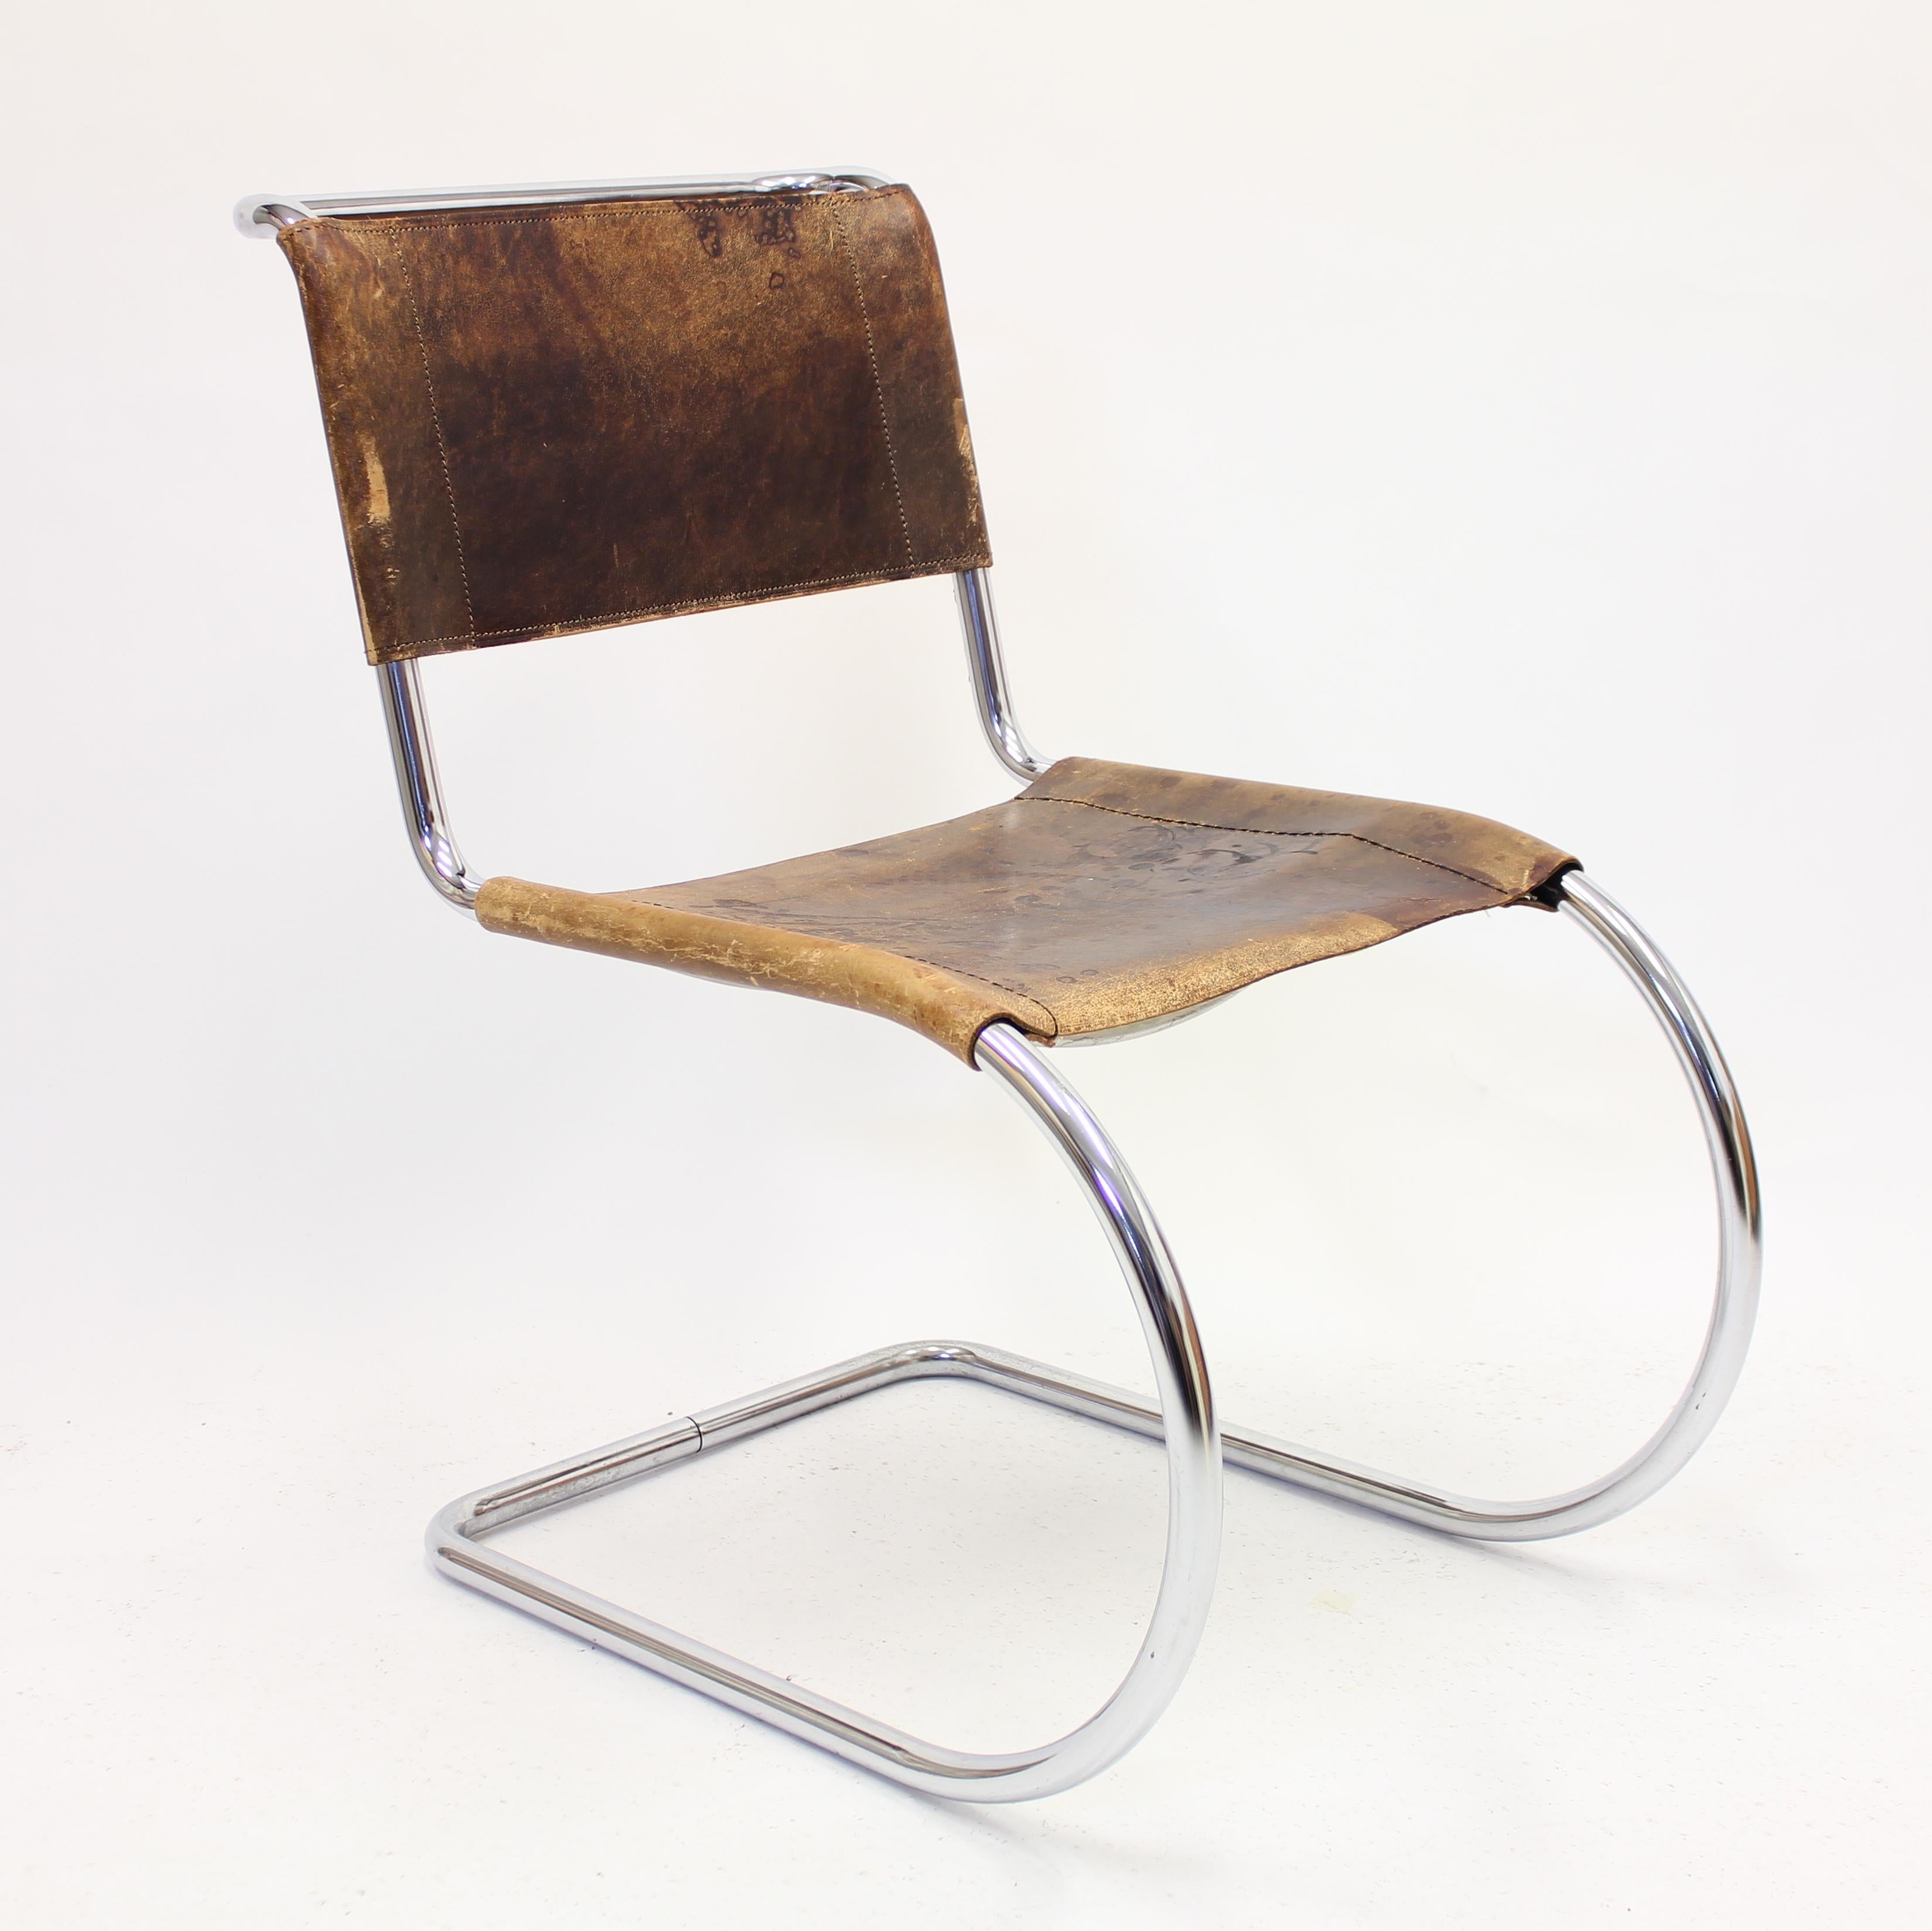 Ludwig Mies van der Rohe's very legendary chair, model MR10 (today renamed S 533), designed in 1927, a few years before he was nominated as the director of the world famous Bauhaus school. The original producer was a German company called Berliner